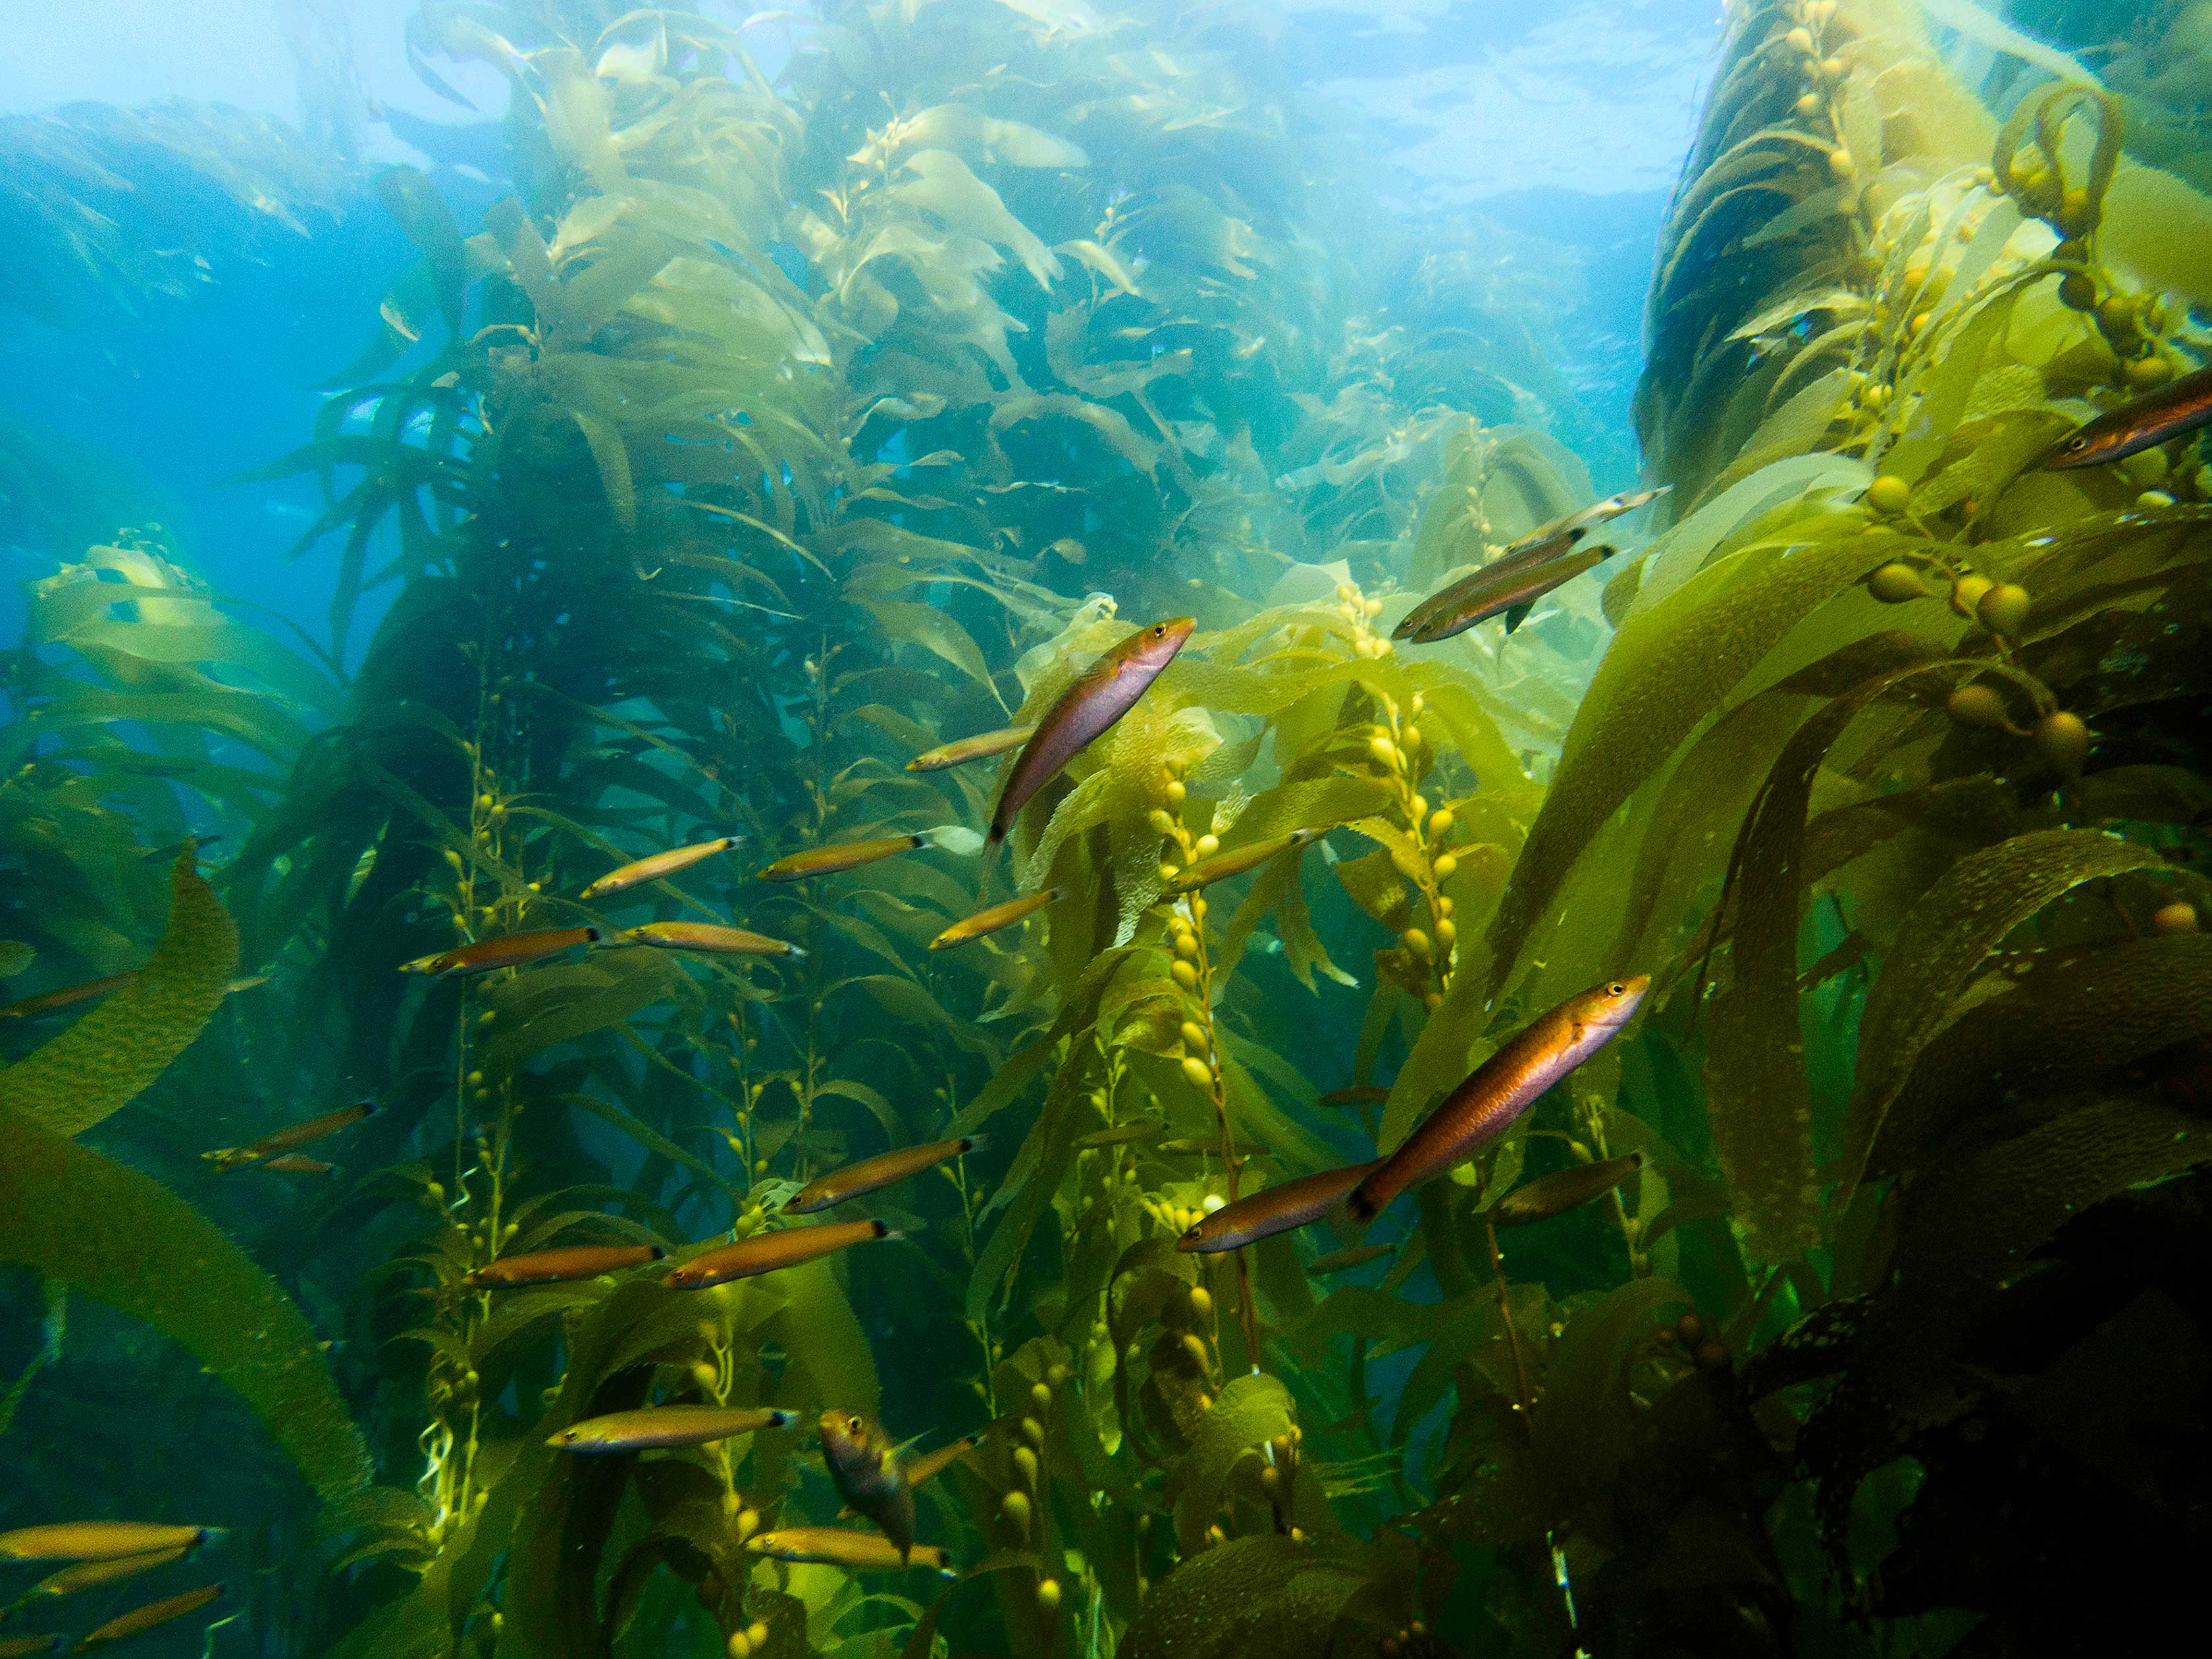 Giant kelp forest populated by kelp fish